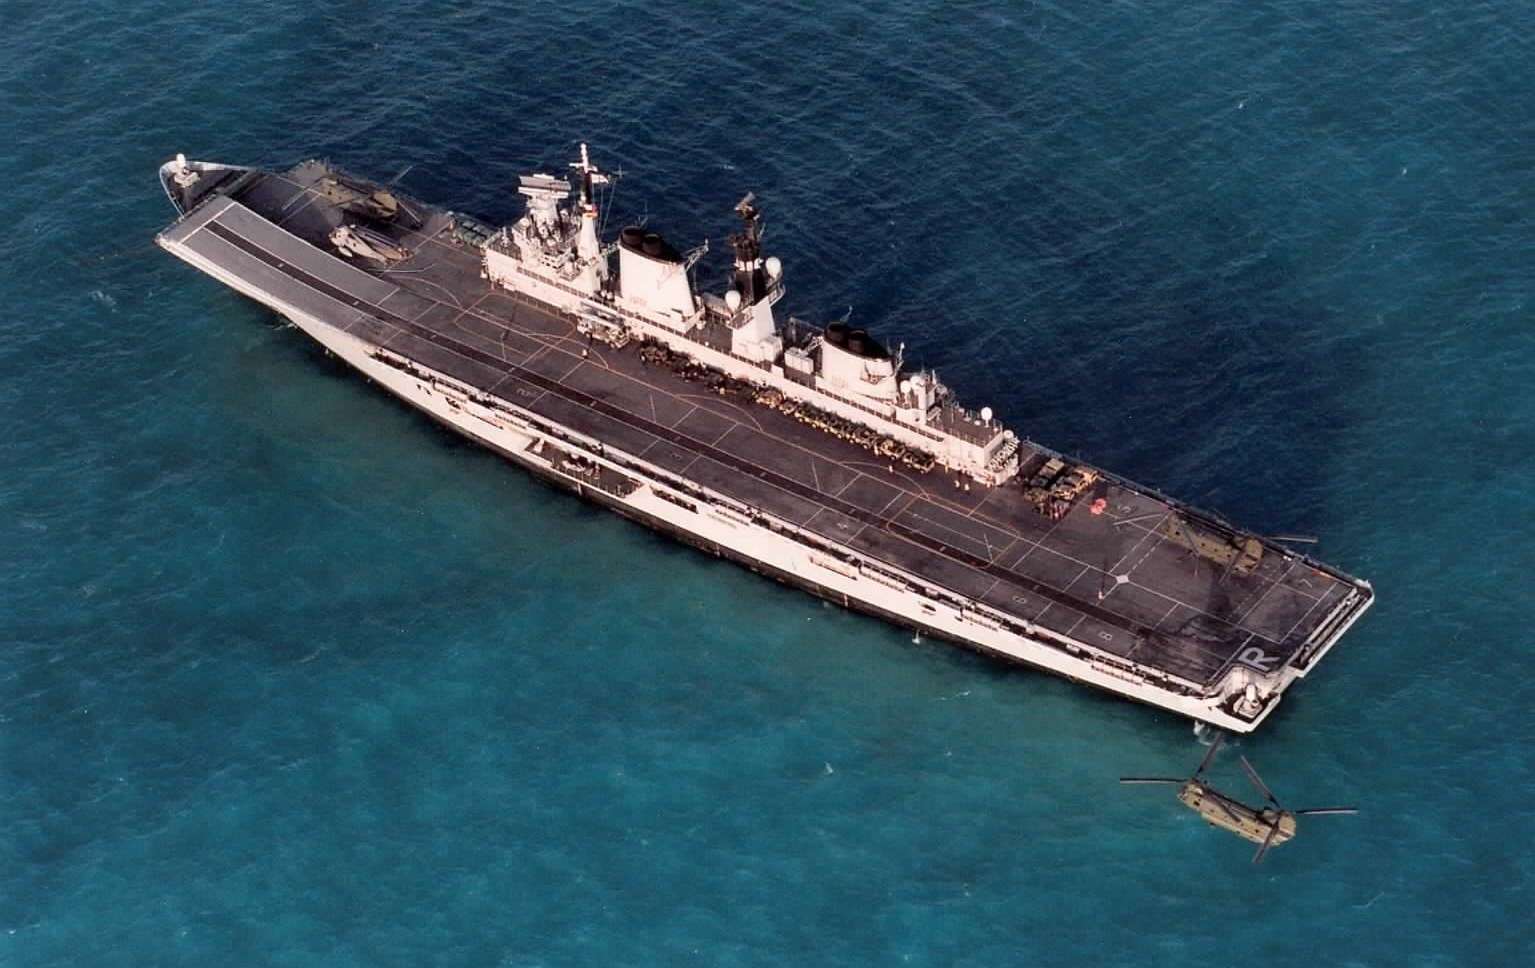 The factory supplied the HMS Ark Royal, among its high profile clients